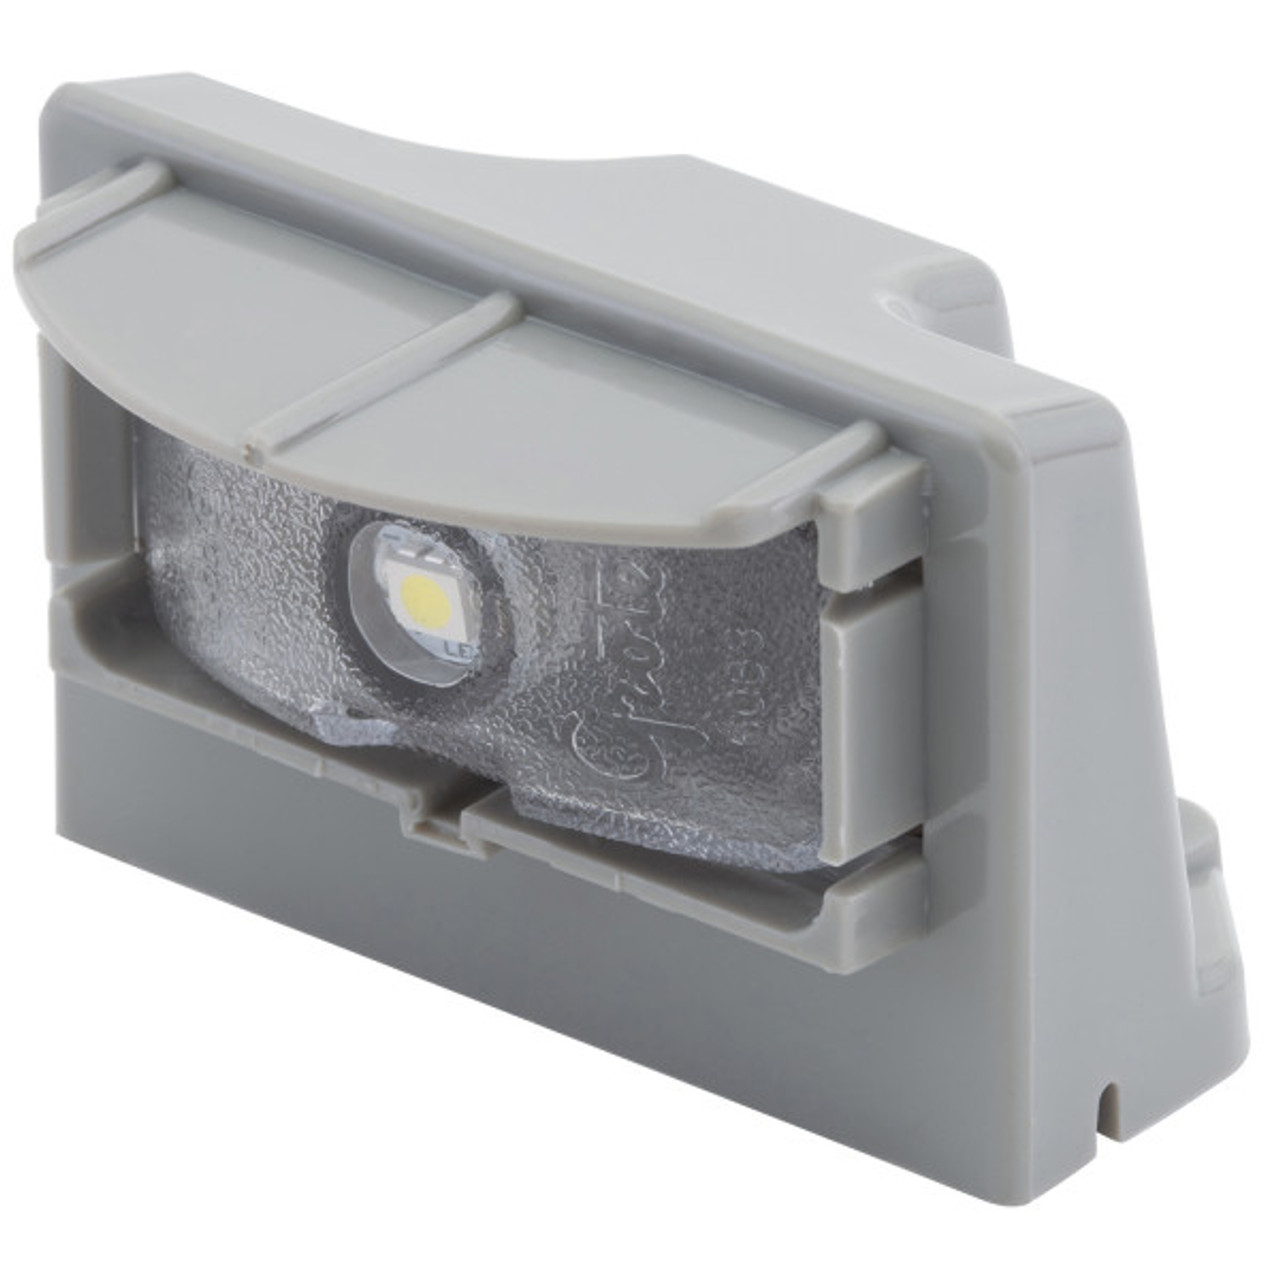 Grote 60681 MicroNova Multi-Volt LED License Lamp- Clear, Gray ABS Housing